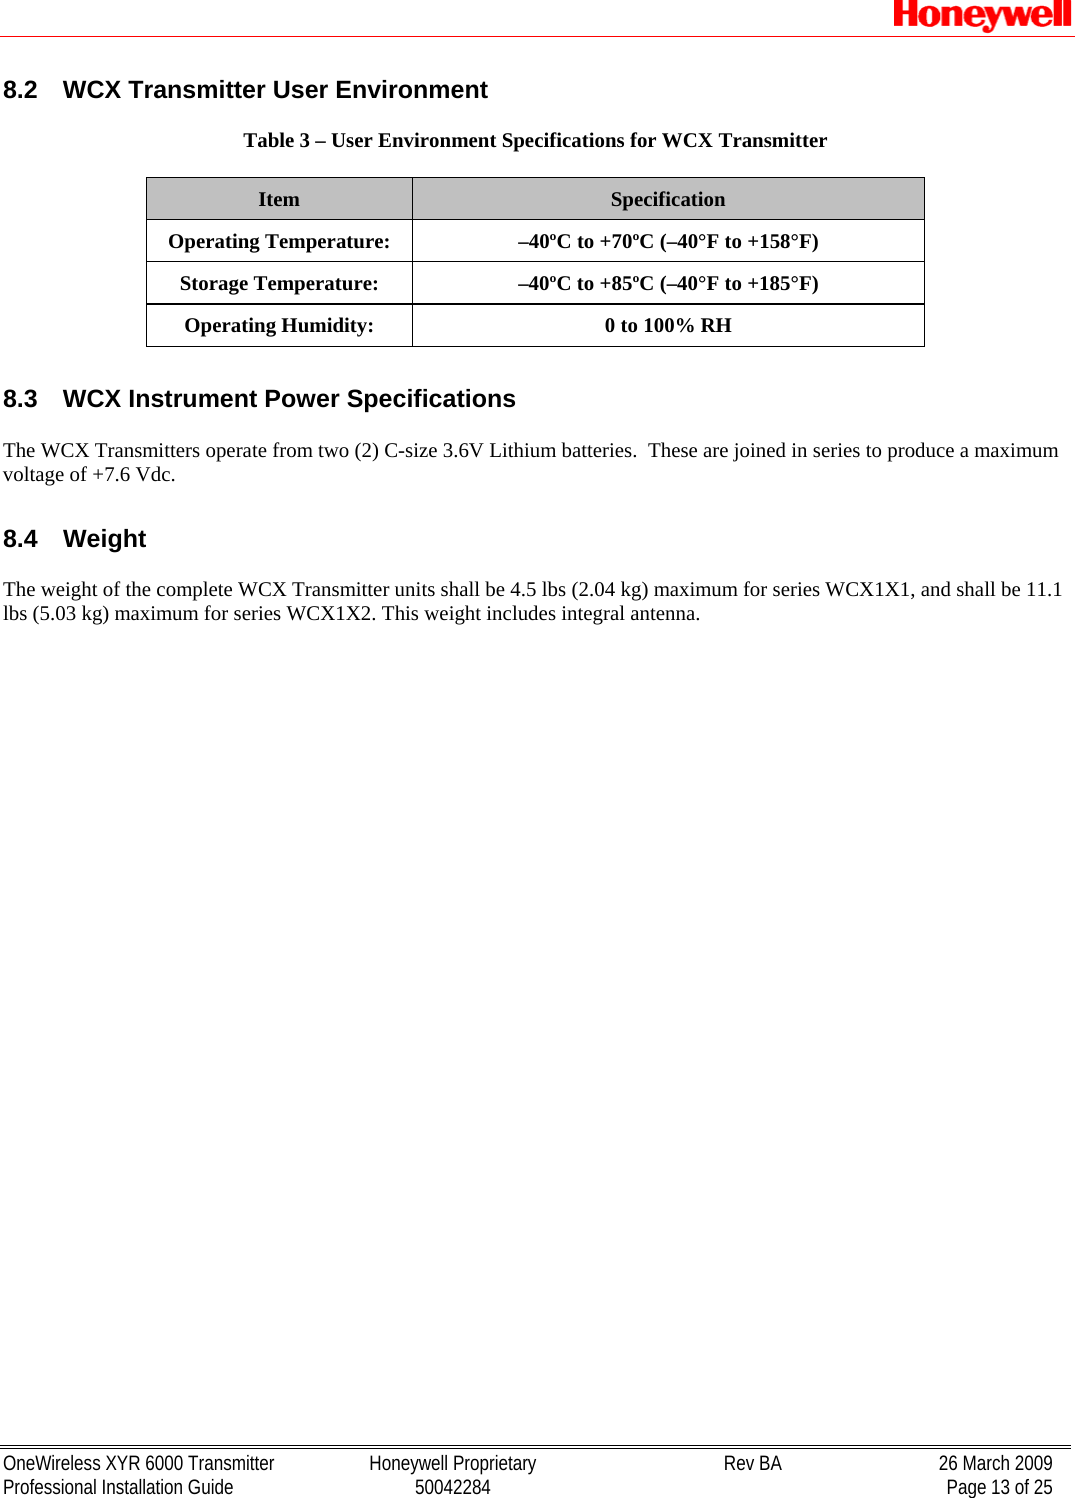   OneWireless XYR 6000 Transmitter  Honeywell Proprietary  Rev BA  26 March 2009 Professional Installation Guide  50042284    Page 13 of 25 8.2  WCX Transmitter User Environment   Table 3 – User Environment Specifications for WCX Transmitter  Item  Specification Operating Temperature:  –40ºC to +70ºC (–40°F to +158°F) Storage Temperature:  –40ºC to +85ºC (–40°F to +185°F) Operating Humidity:  0 to 100% RH  8.3  WCX Instrument Power Specifications  The WCX Transmitters operate from two (2) C-size 3.6V Lithium batteries.  These are joined in series to produce a maximum voltage of +7.6 Vdc.   8.4 Weight   The weight of the complete WCX Transmitter units shall be 4.5 lbs (2.04 kg) maximum for series WCX1X1, and shall be 11.1 lbs (5.03 kg) maximum for series WCX1X2. This weight includes integral antenna.  